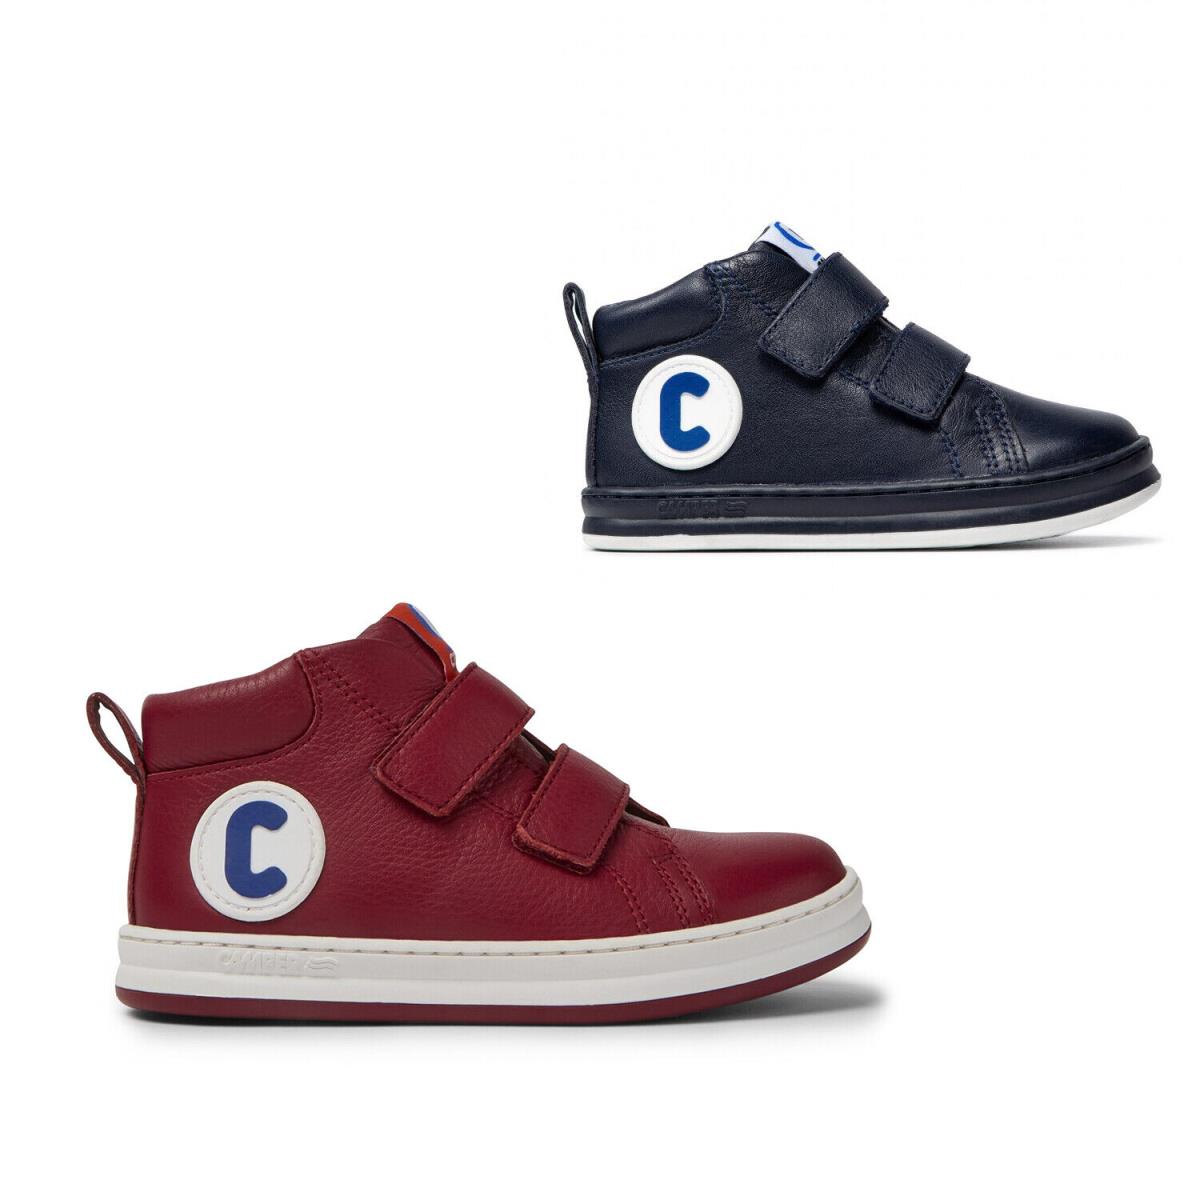 Boys Camper Runner Four High Top Leather Sneaker Kids Shoes